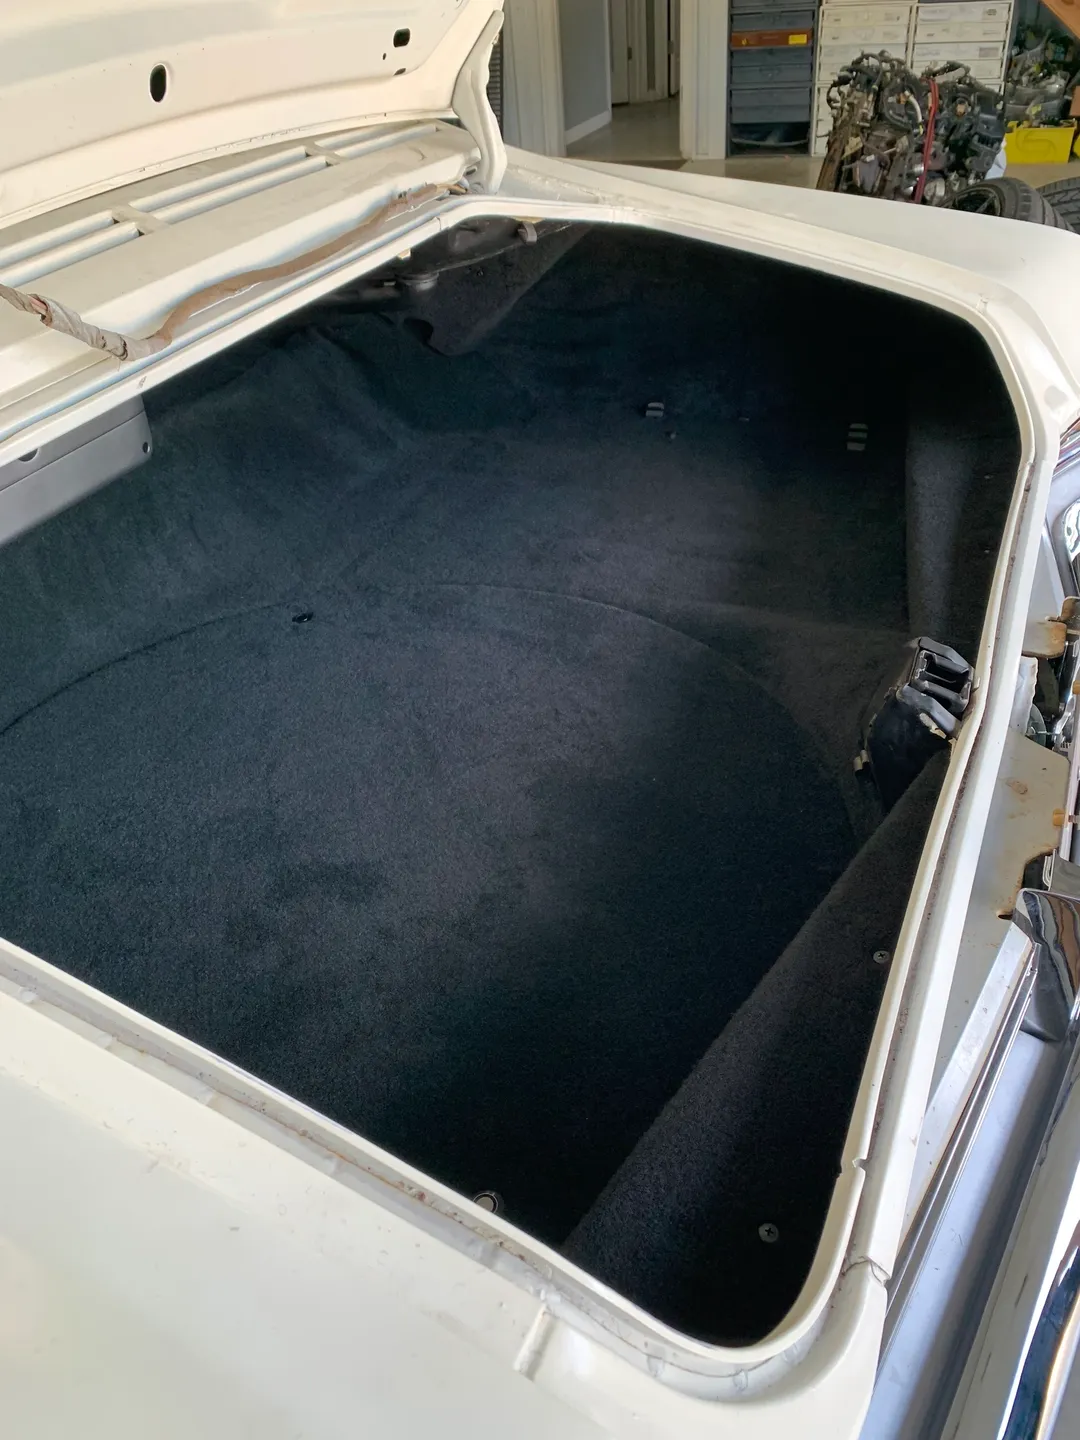 The open trunk of a white vintage car